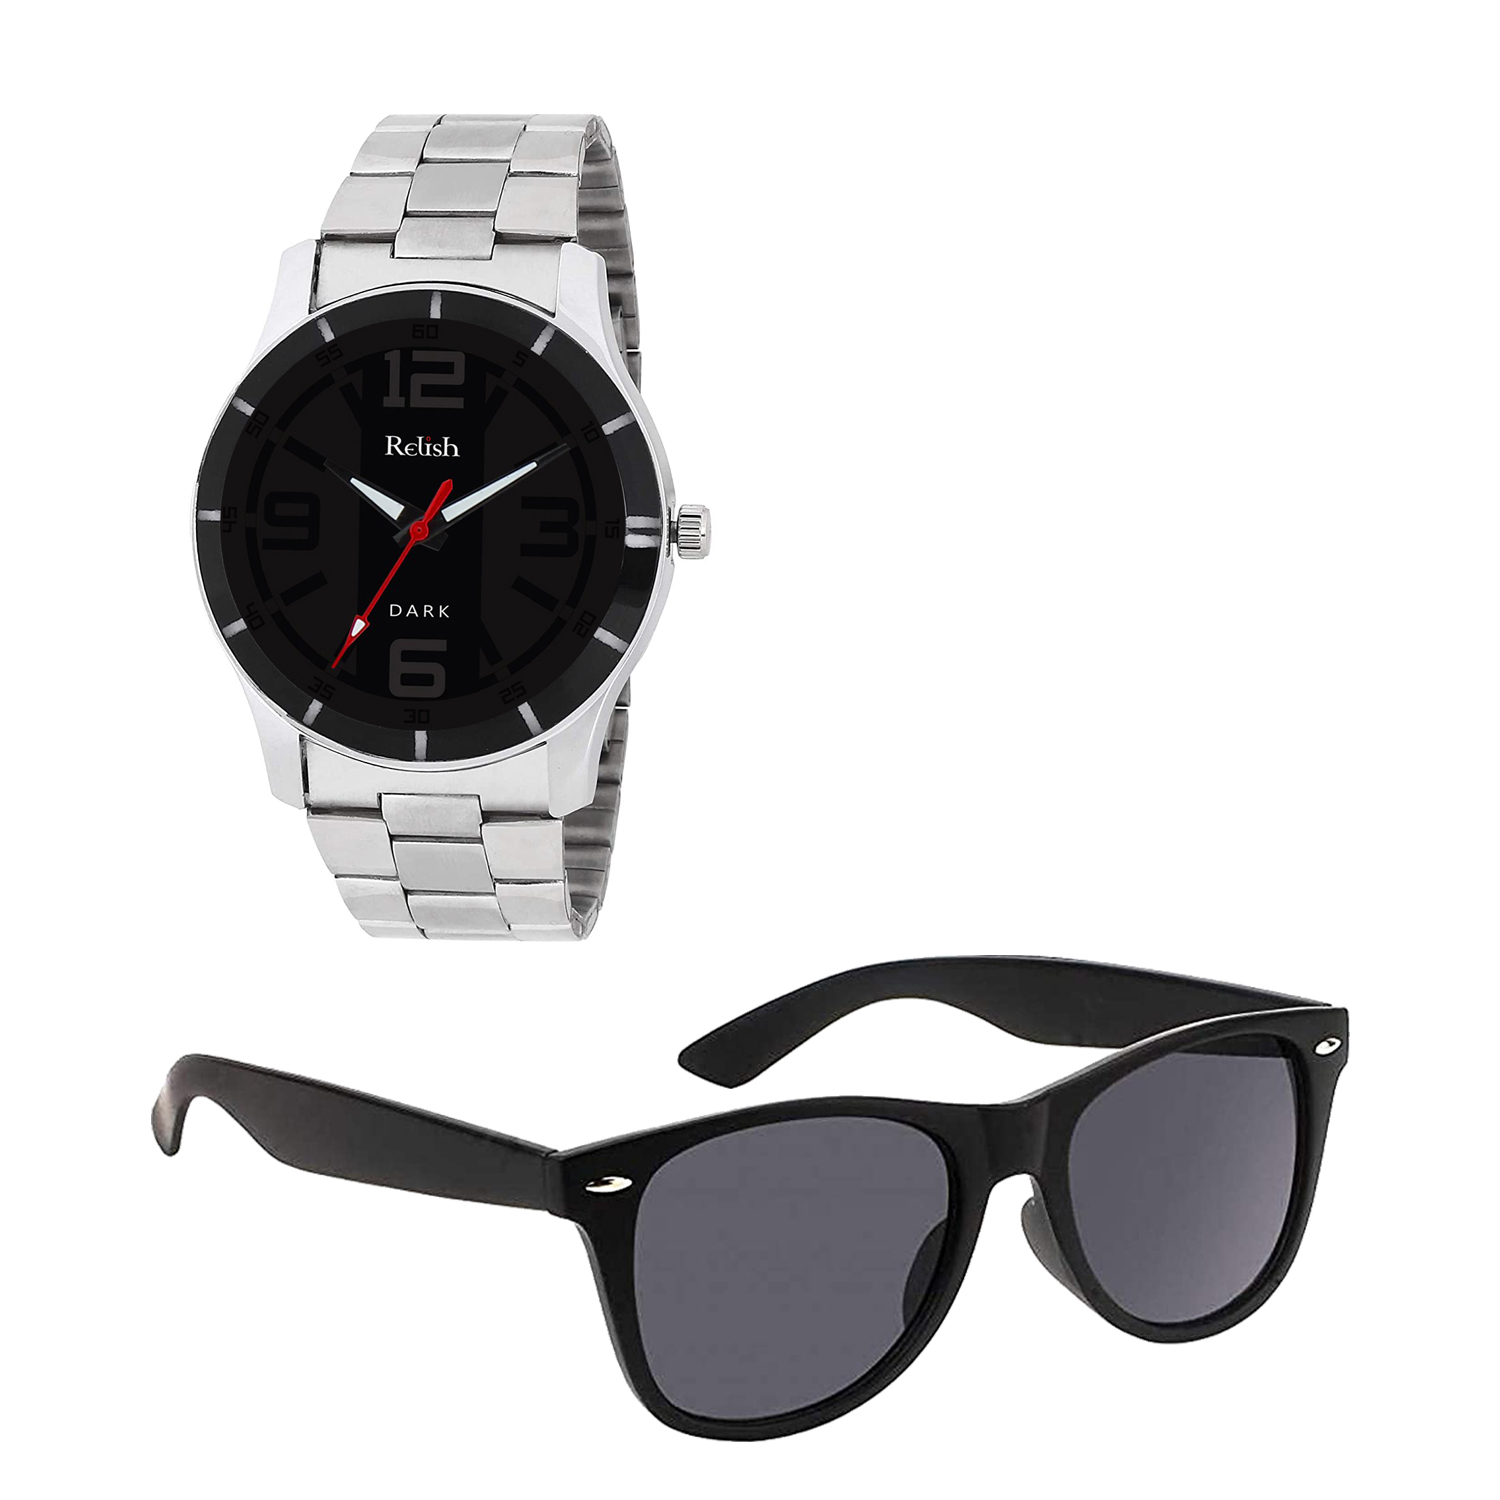 Relish Analogue Stainles Steel Strap Watch Gift Combo Set for Men's Boy's RE BB8028 SG